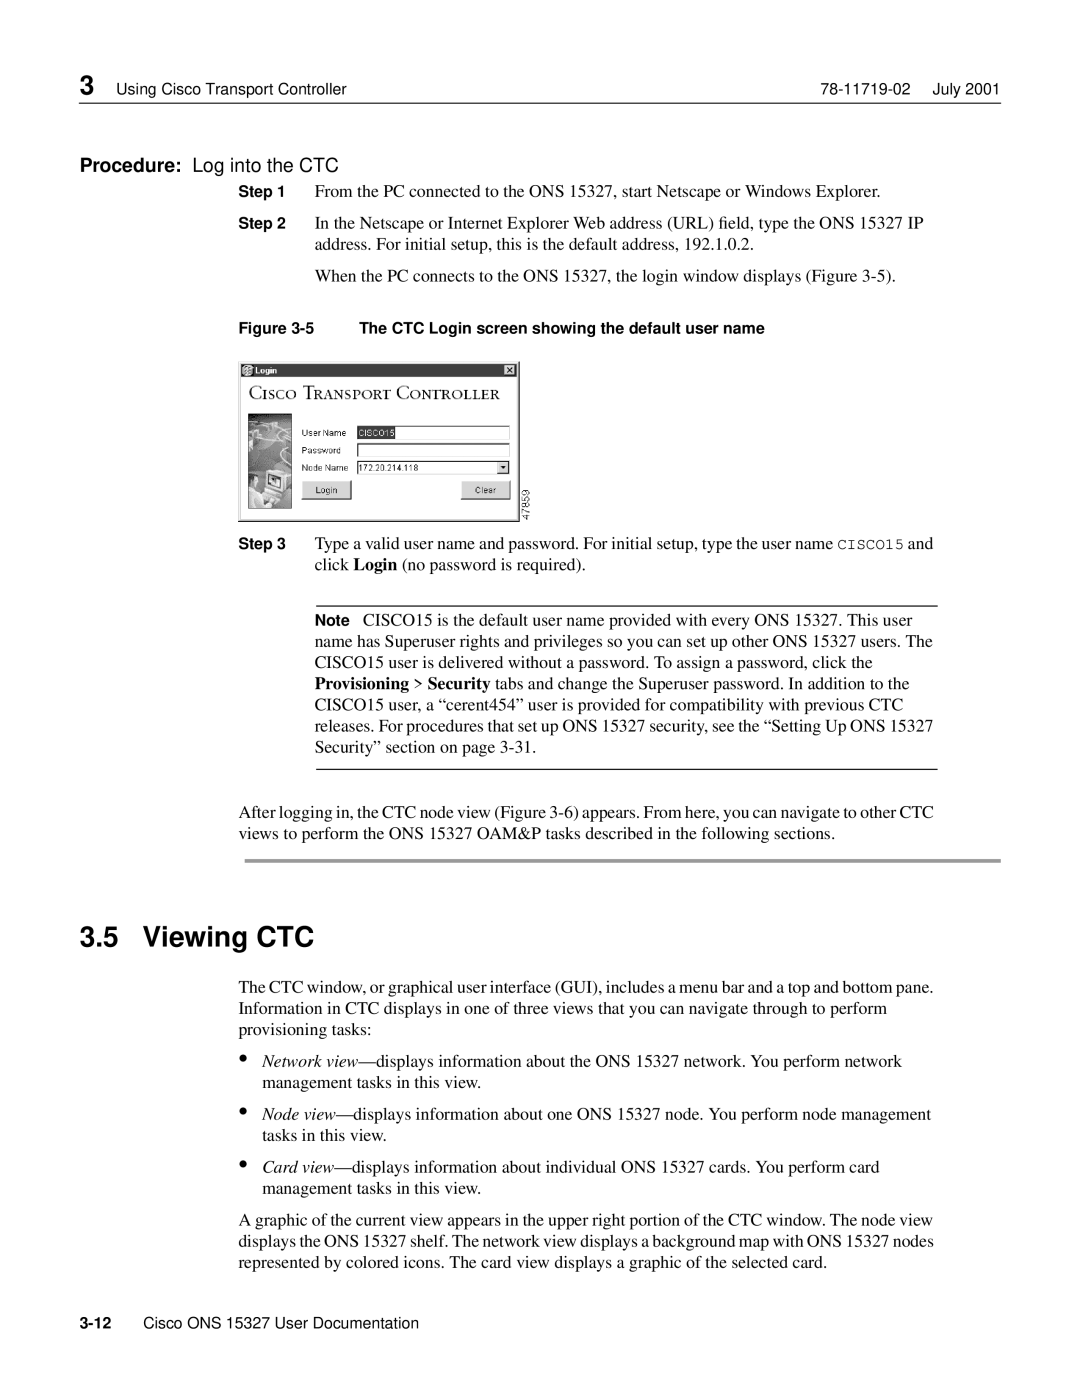 Cisco Systems ONS 15327 manual Viewing CTC, Procedure Log into the CTC 